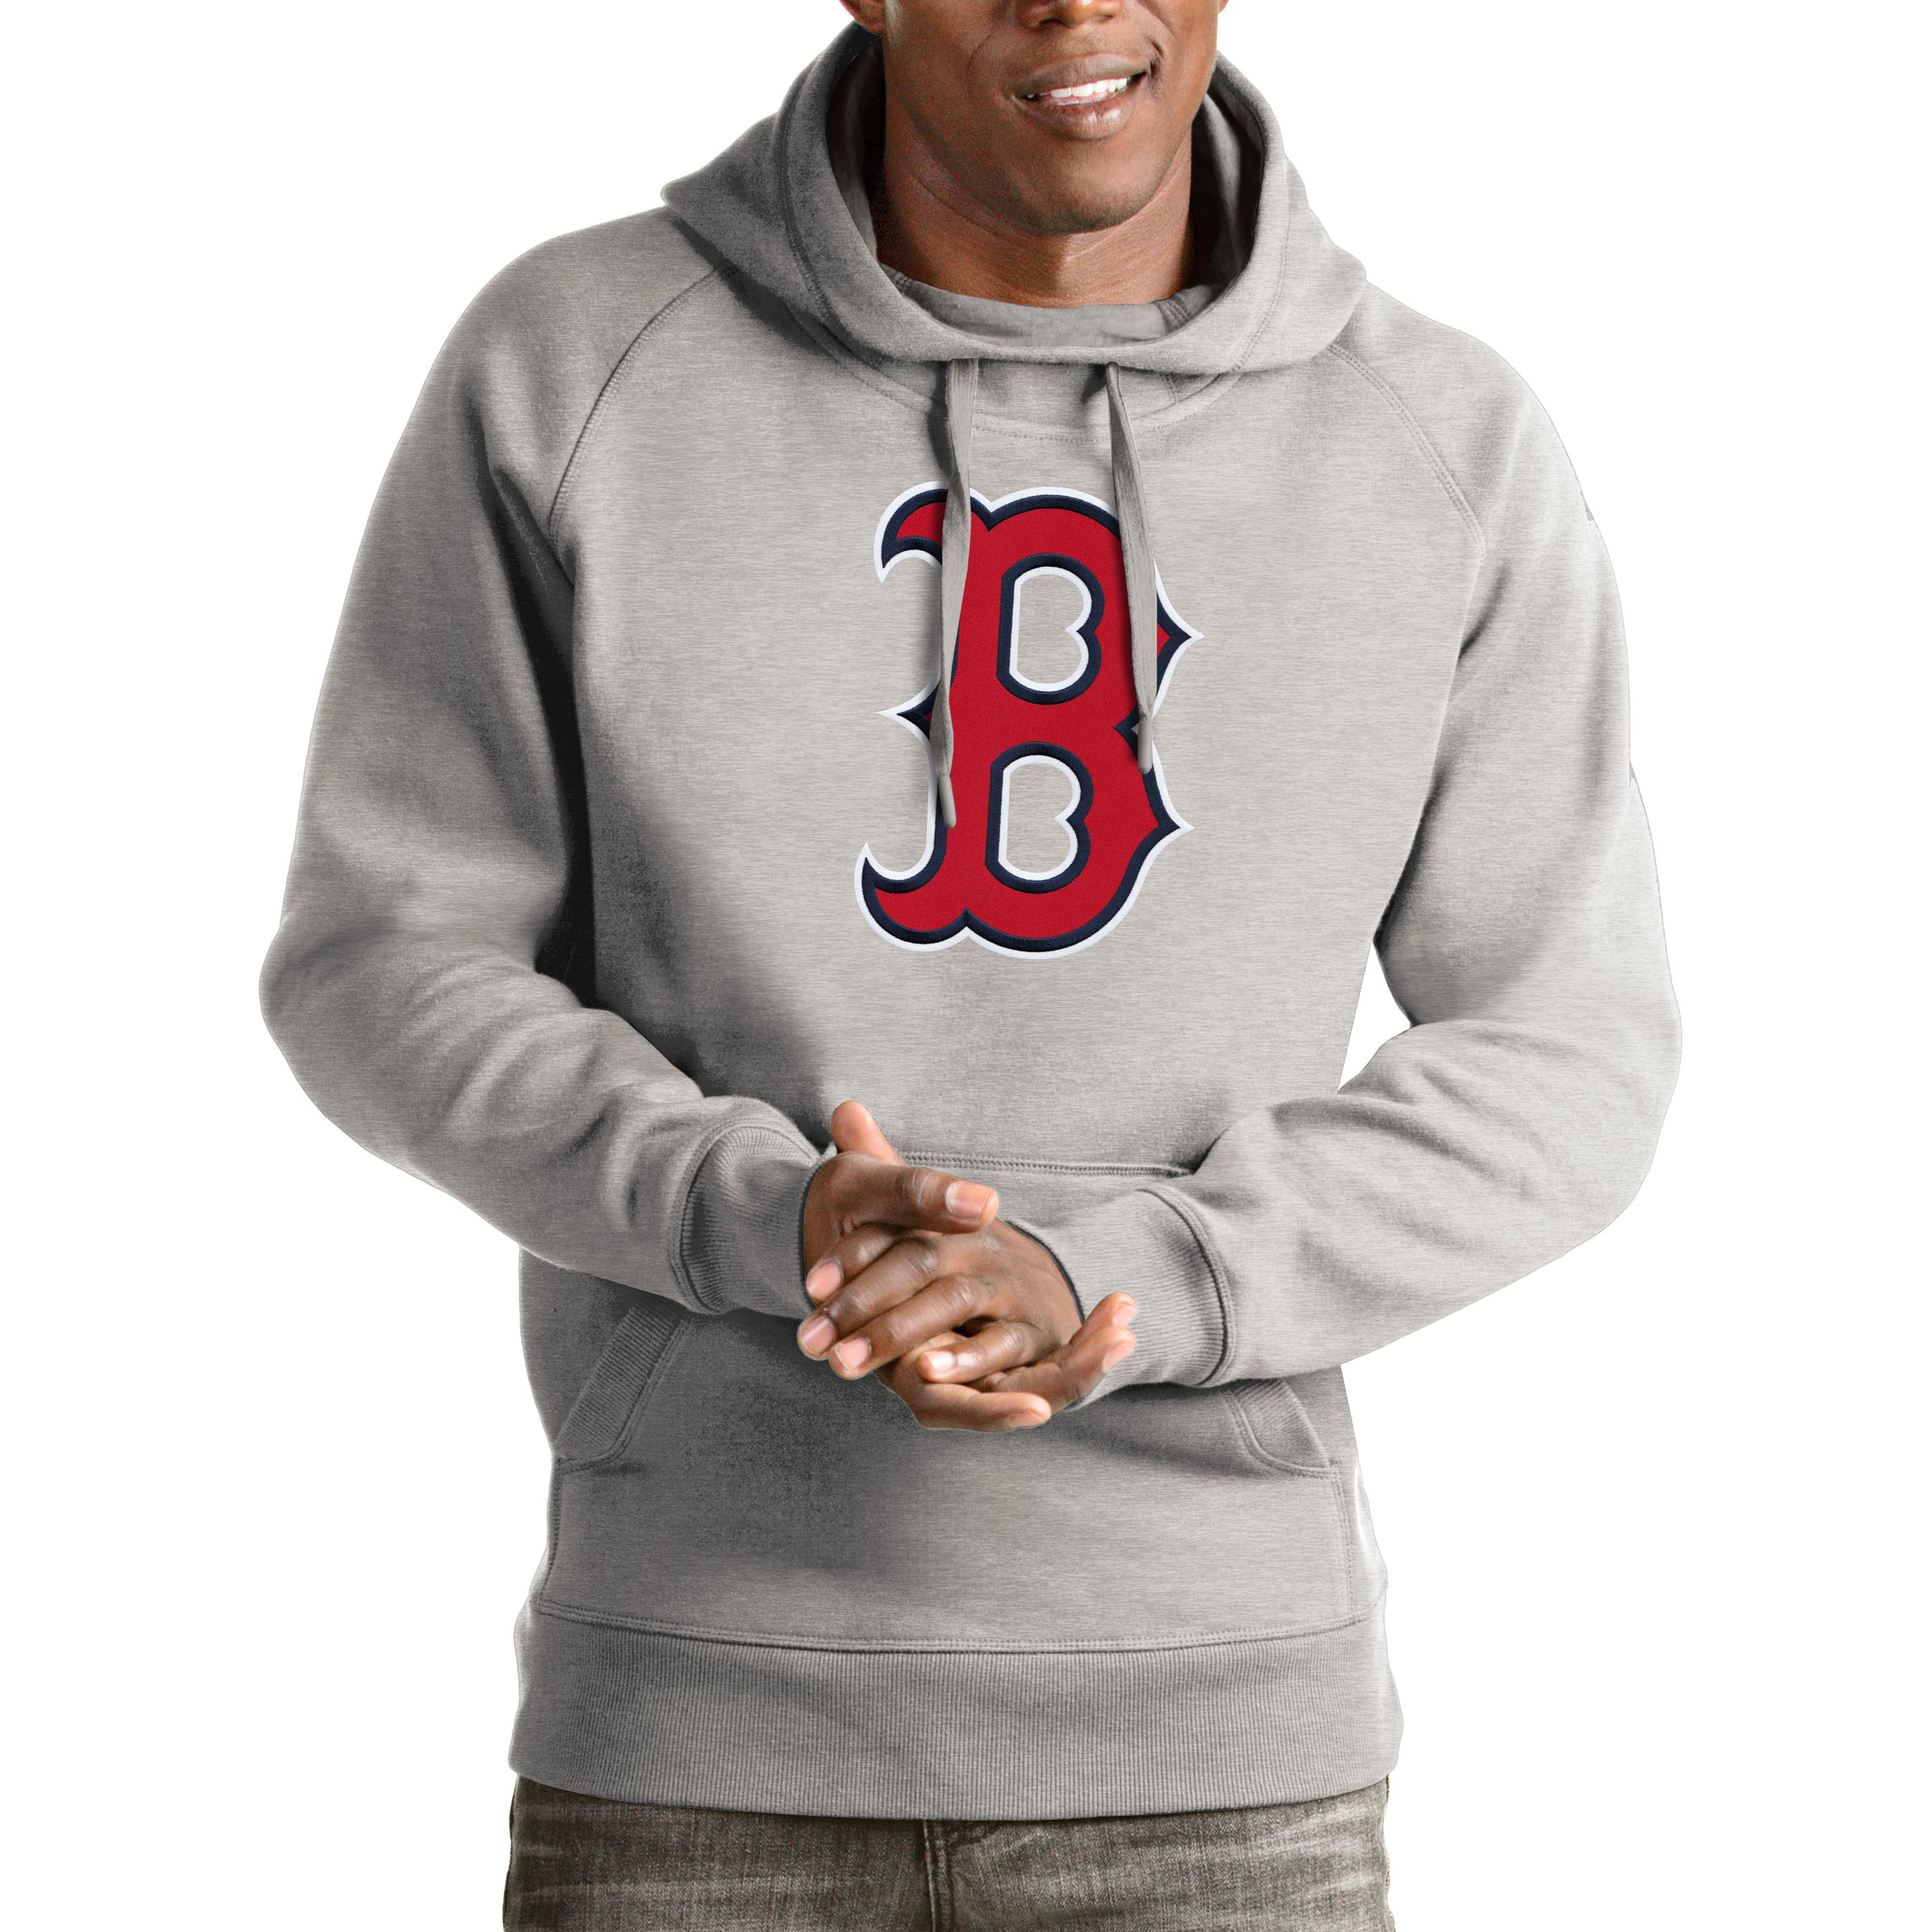 Men's Antigua Heathered Gray Boston Red Sox Victory Pullover